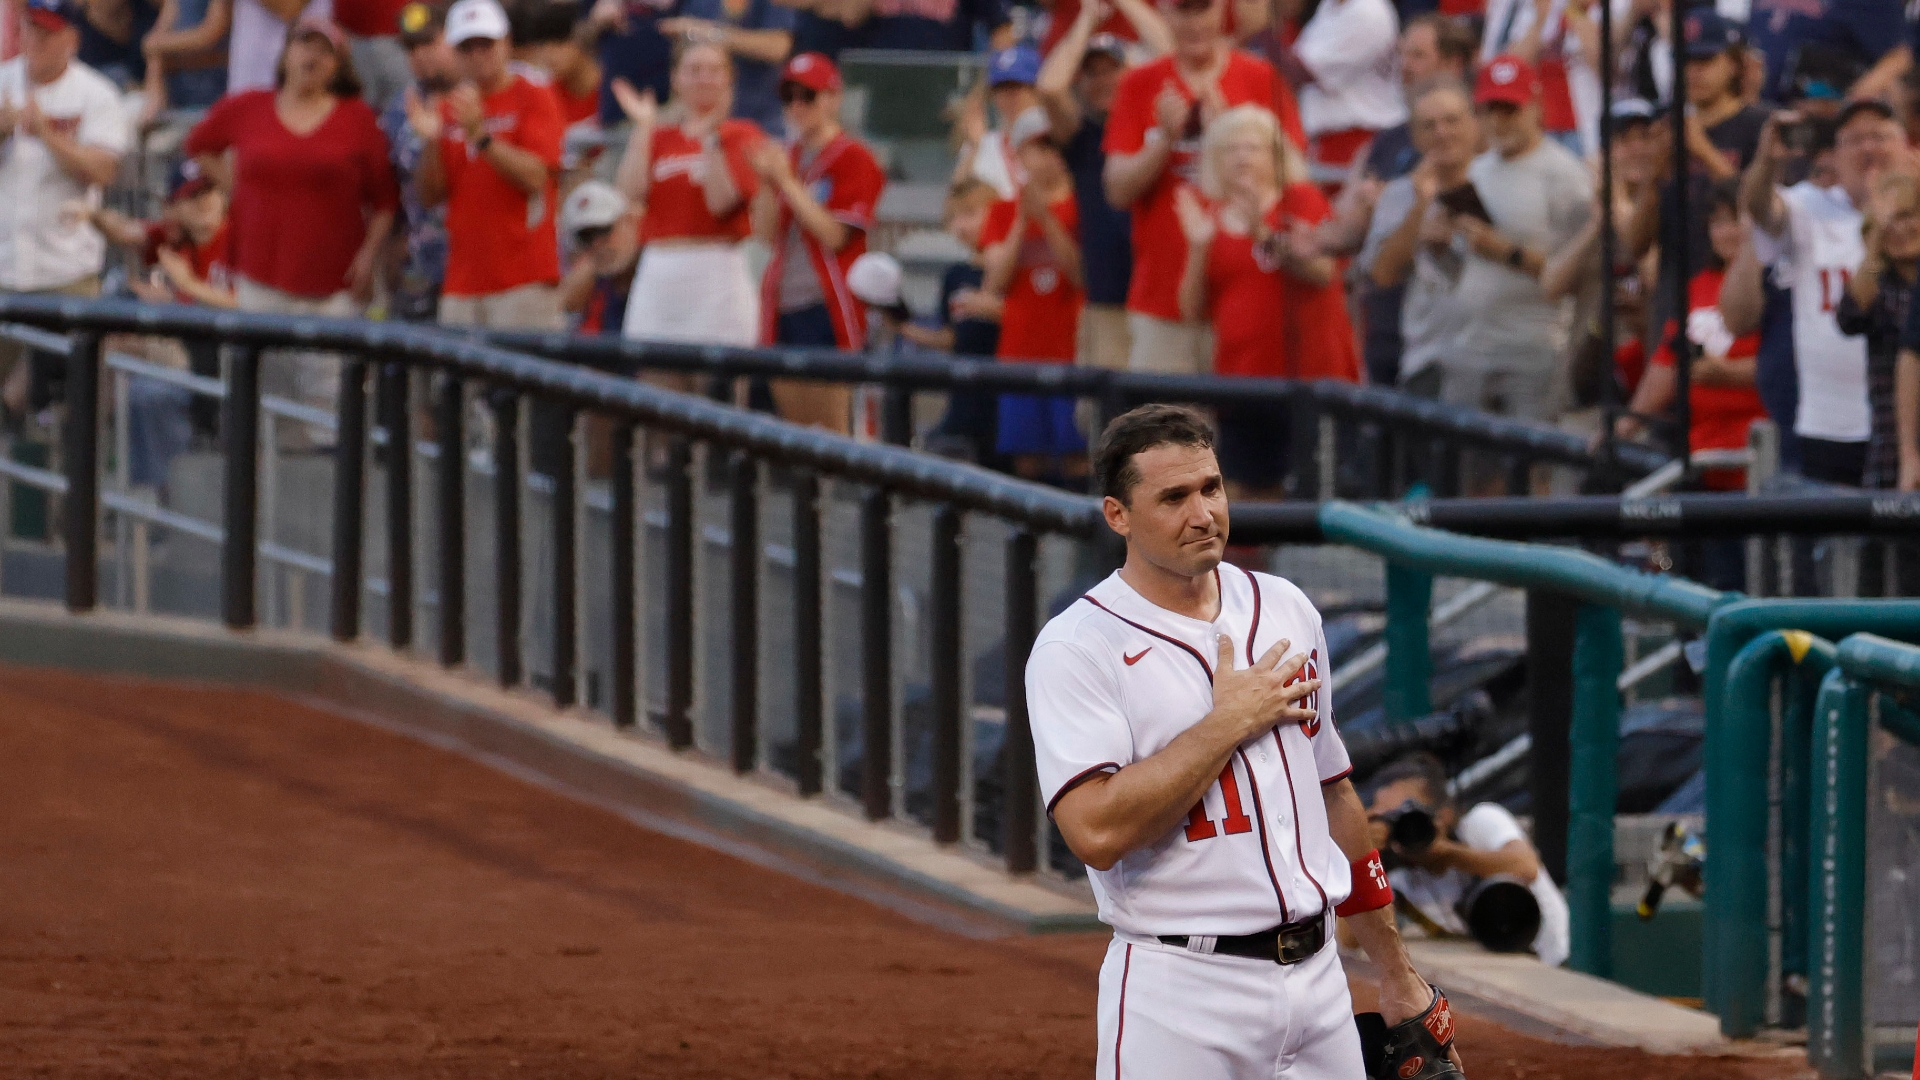 Ryan Zimmerman receives a standing ovation during his final game with the Nationals